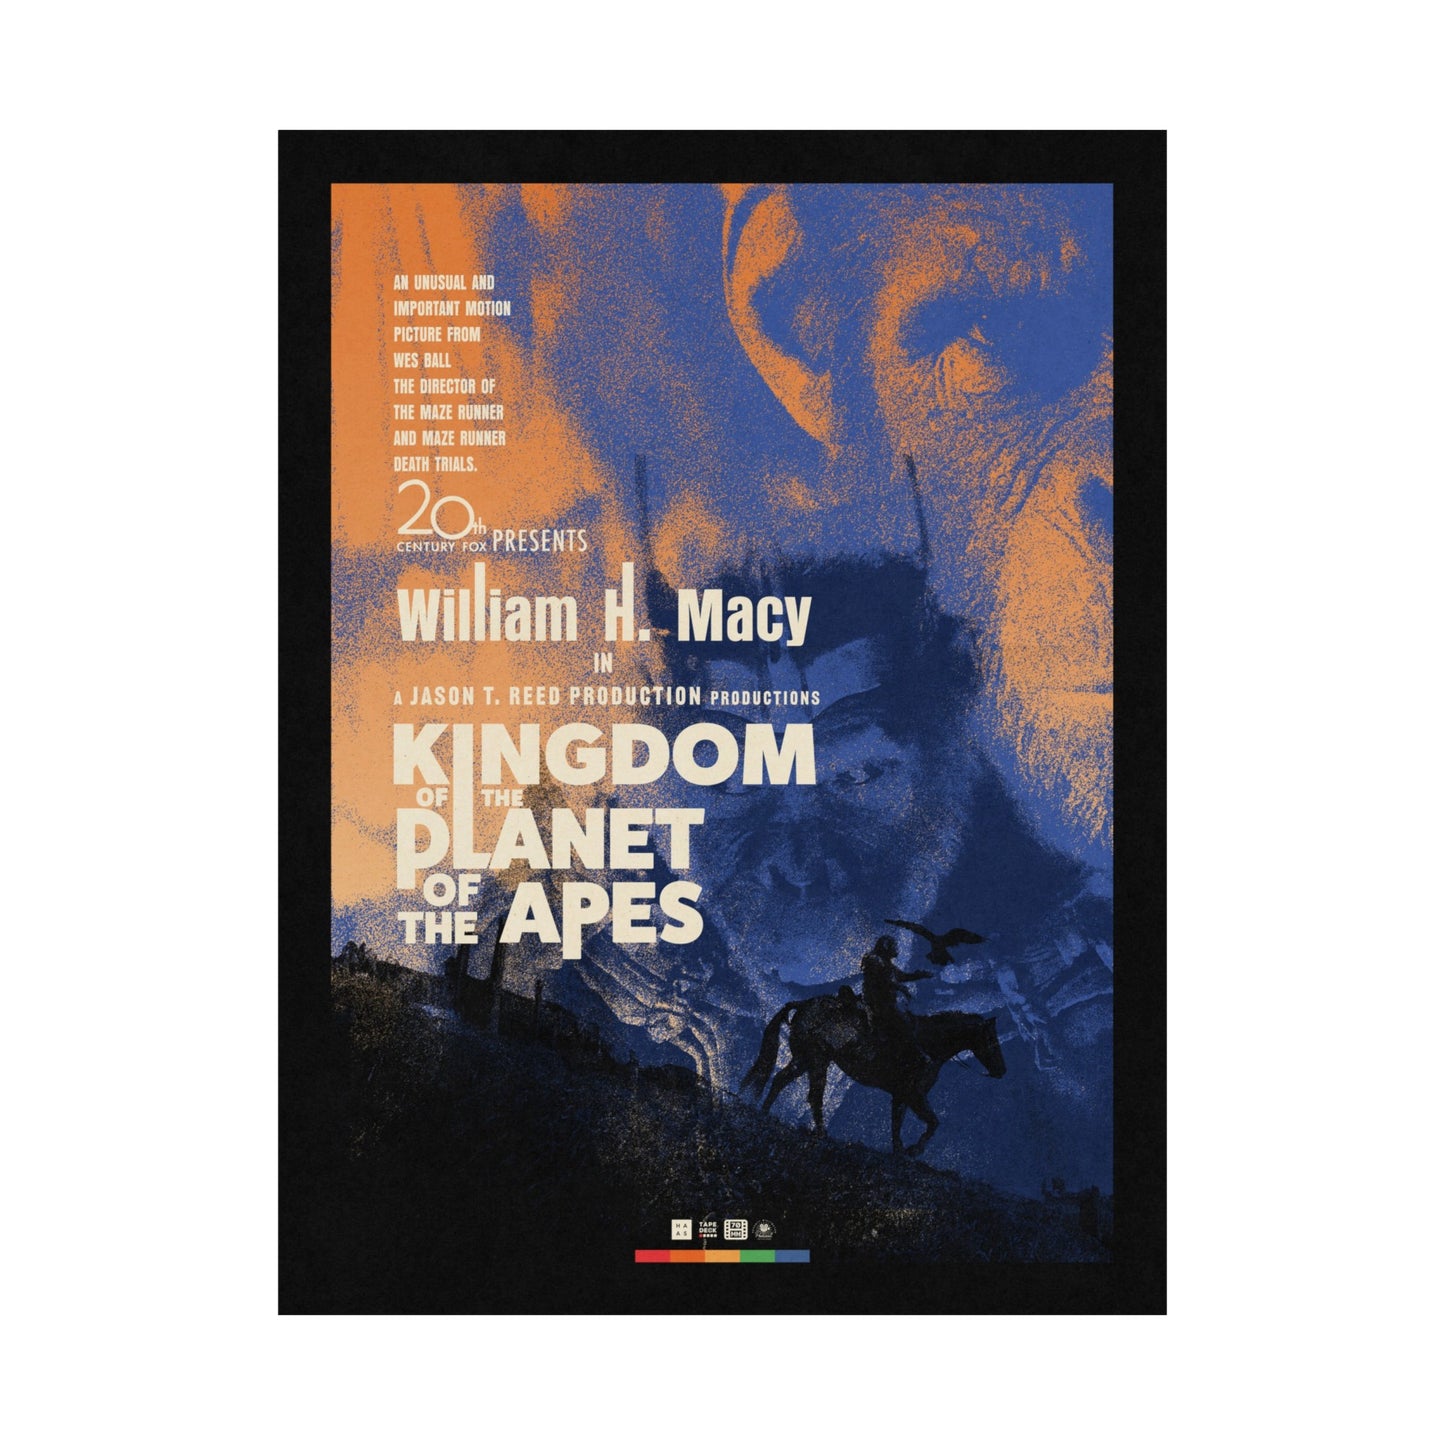 Episode 220: Kingdom of the Planet of the Apes